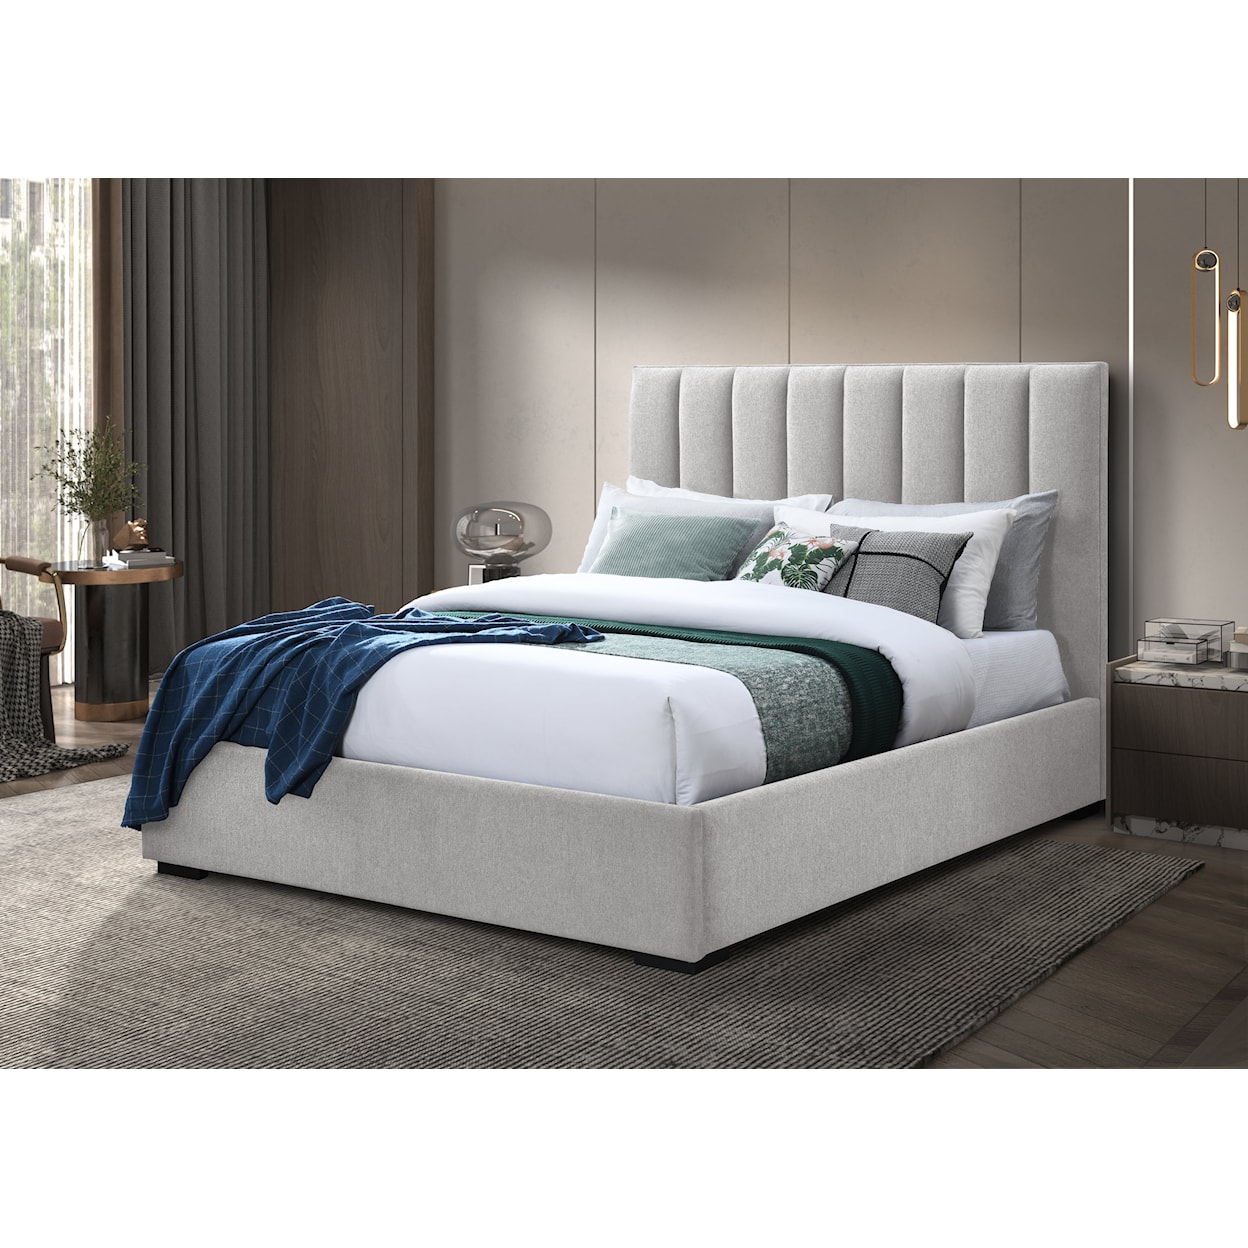 Lifestyle 9432A Upholstered Bed - Full